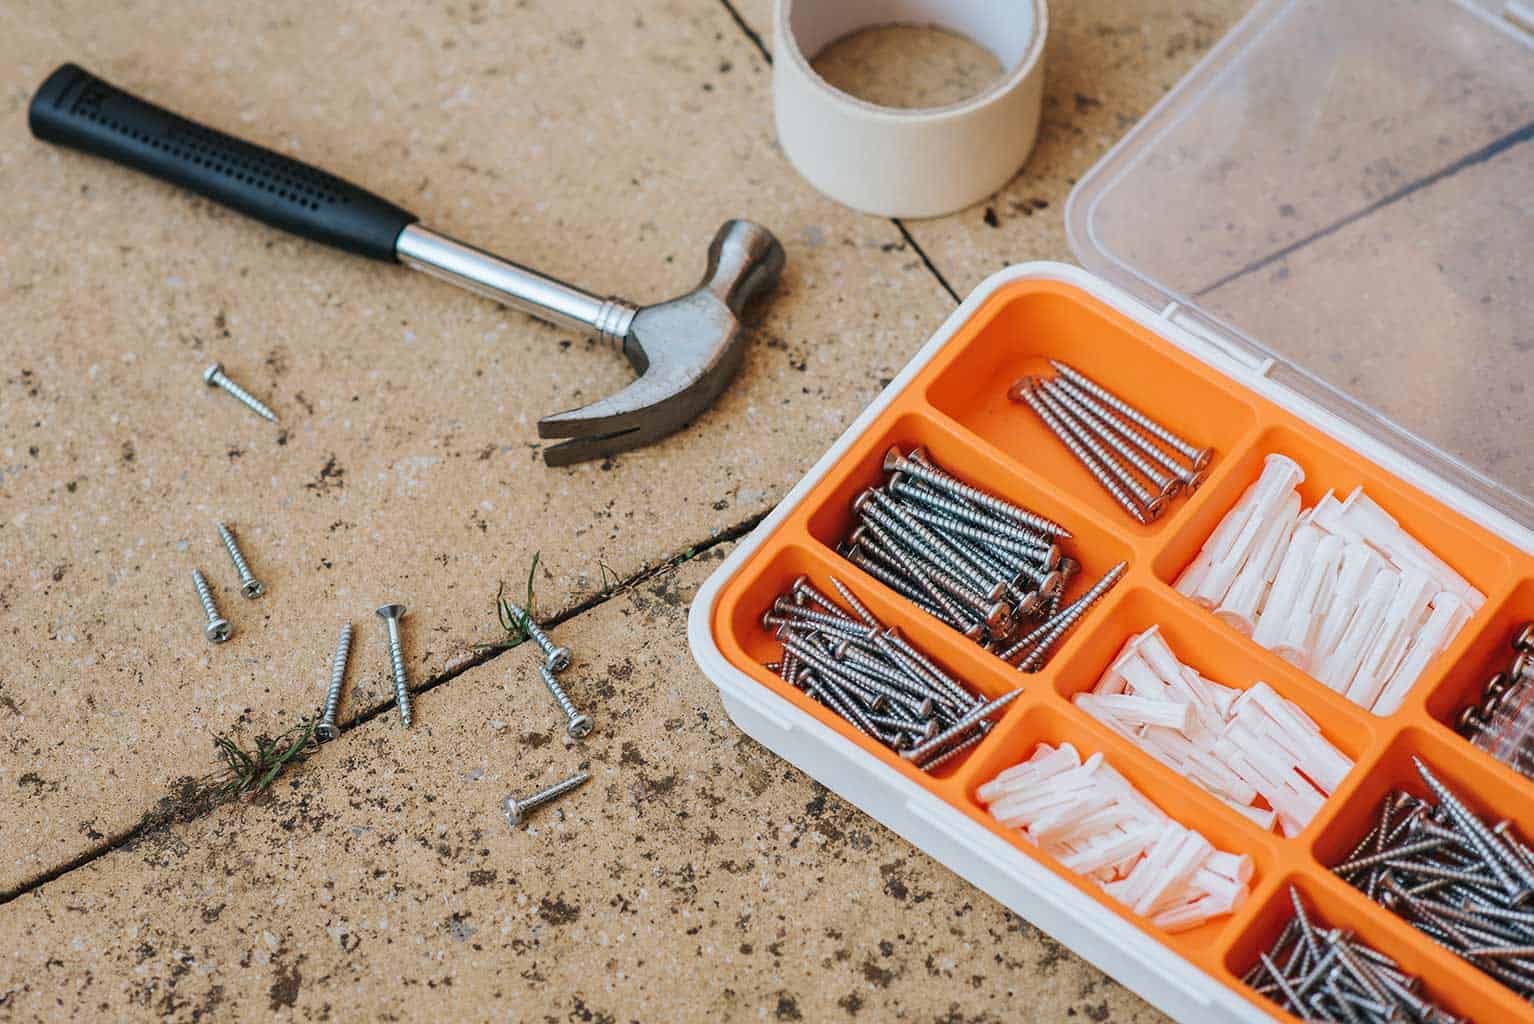 essential fixings for diy projects